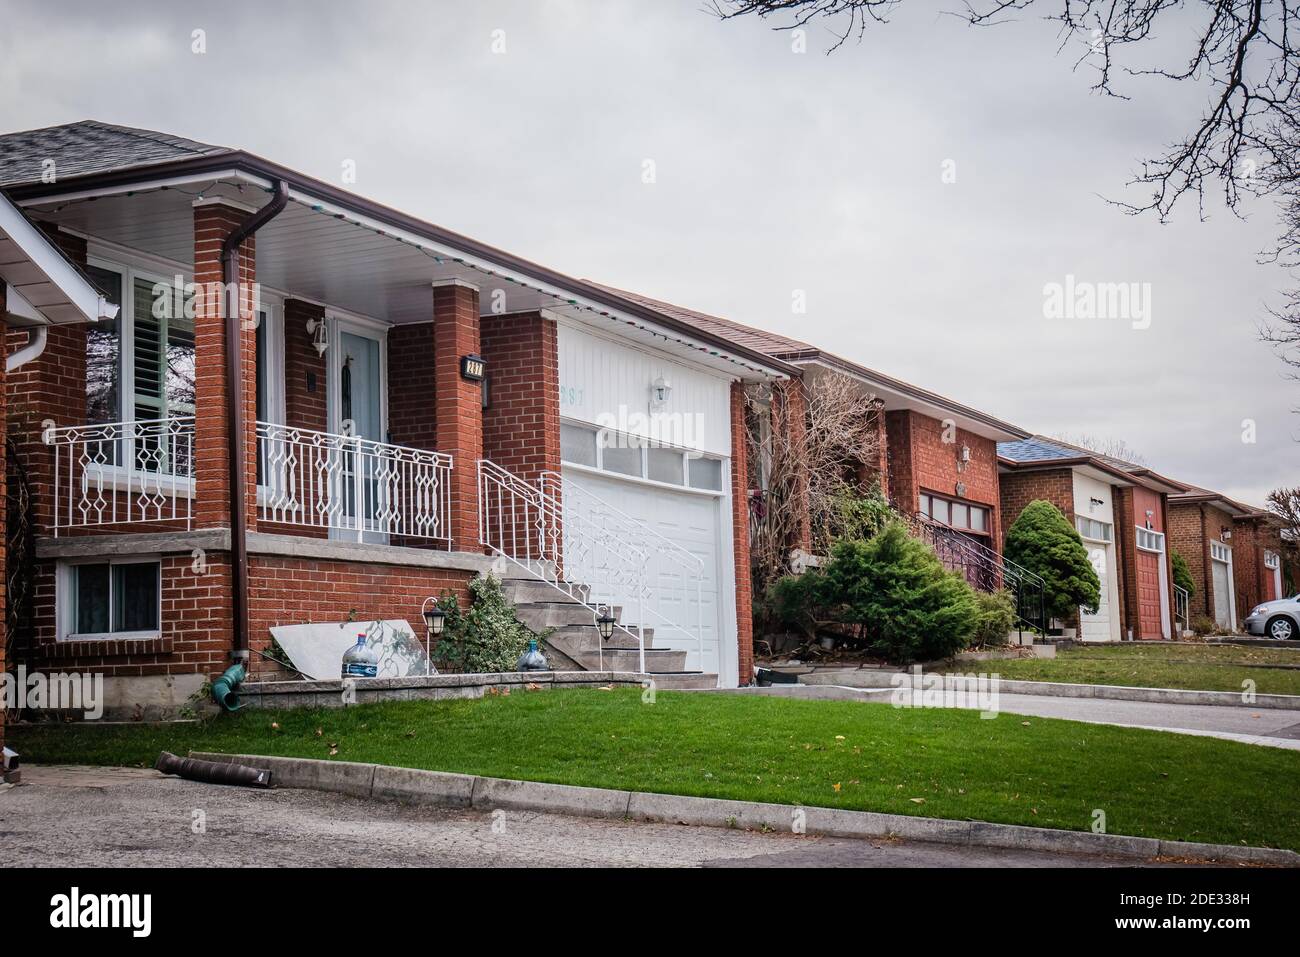 bungalow, a single storey small house, in toronto, canada Stock Photo